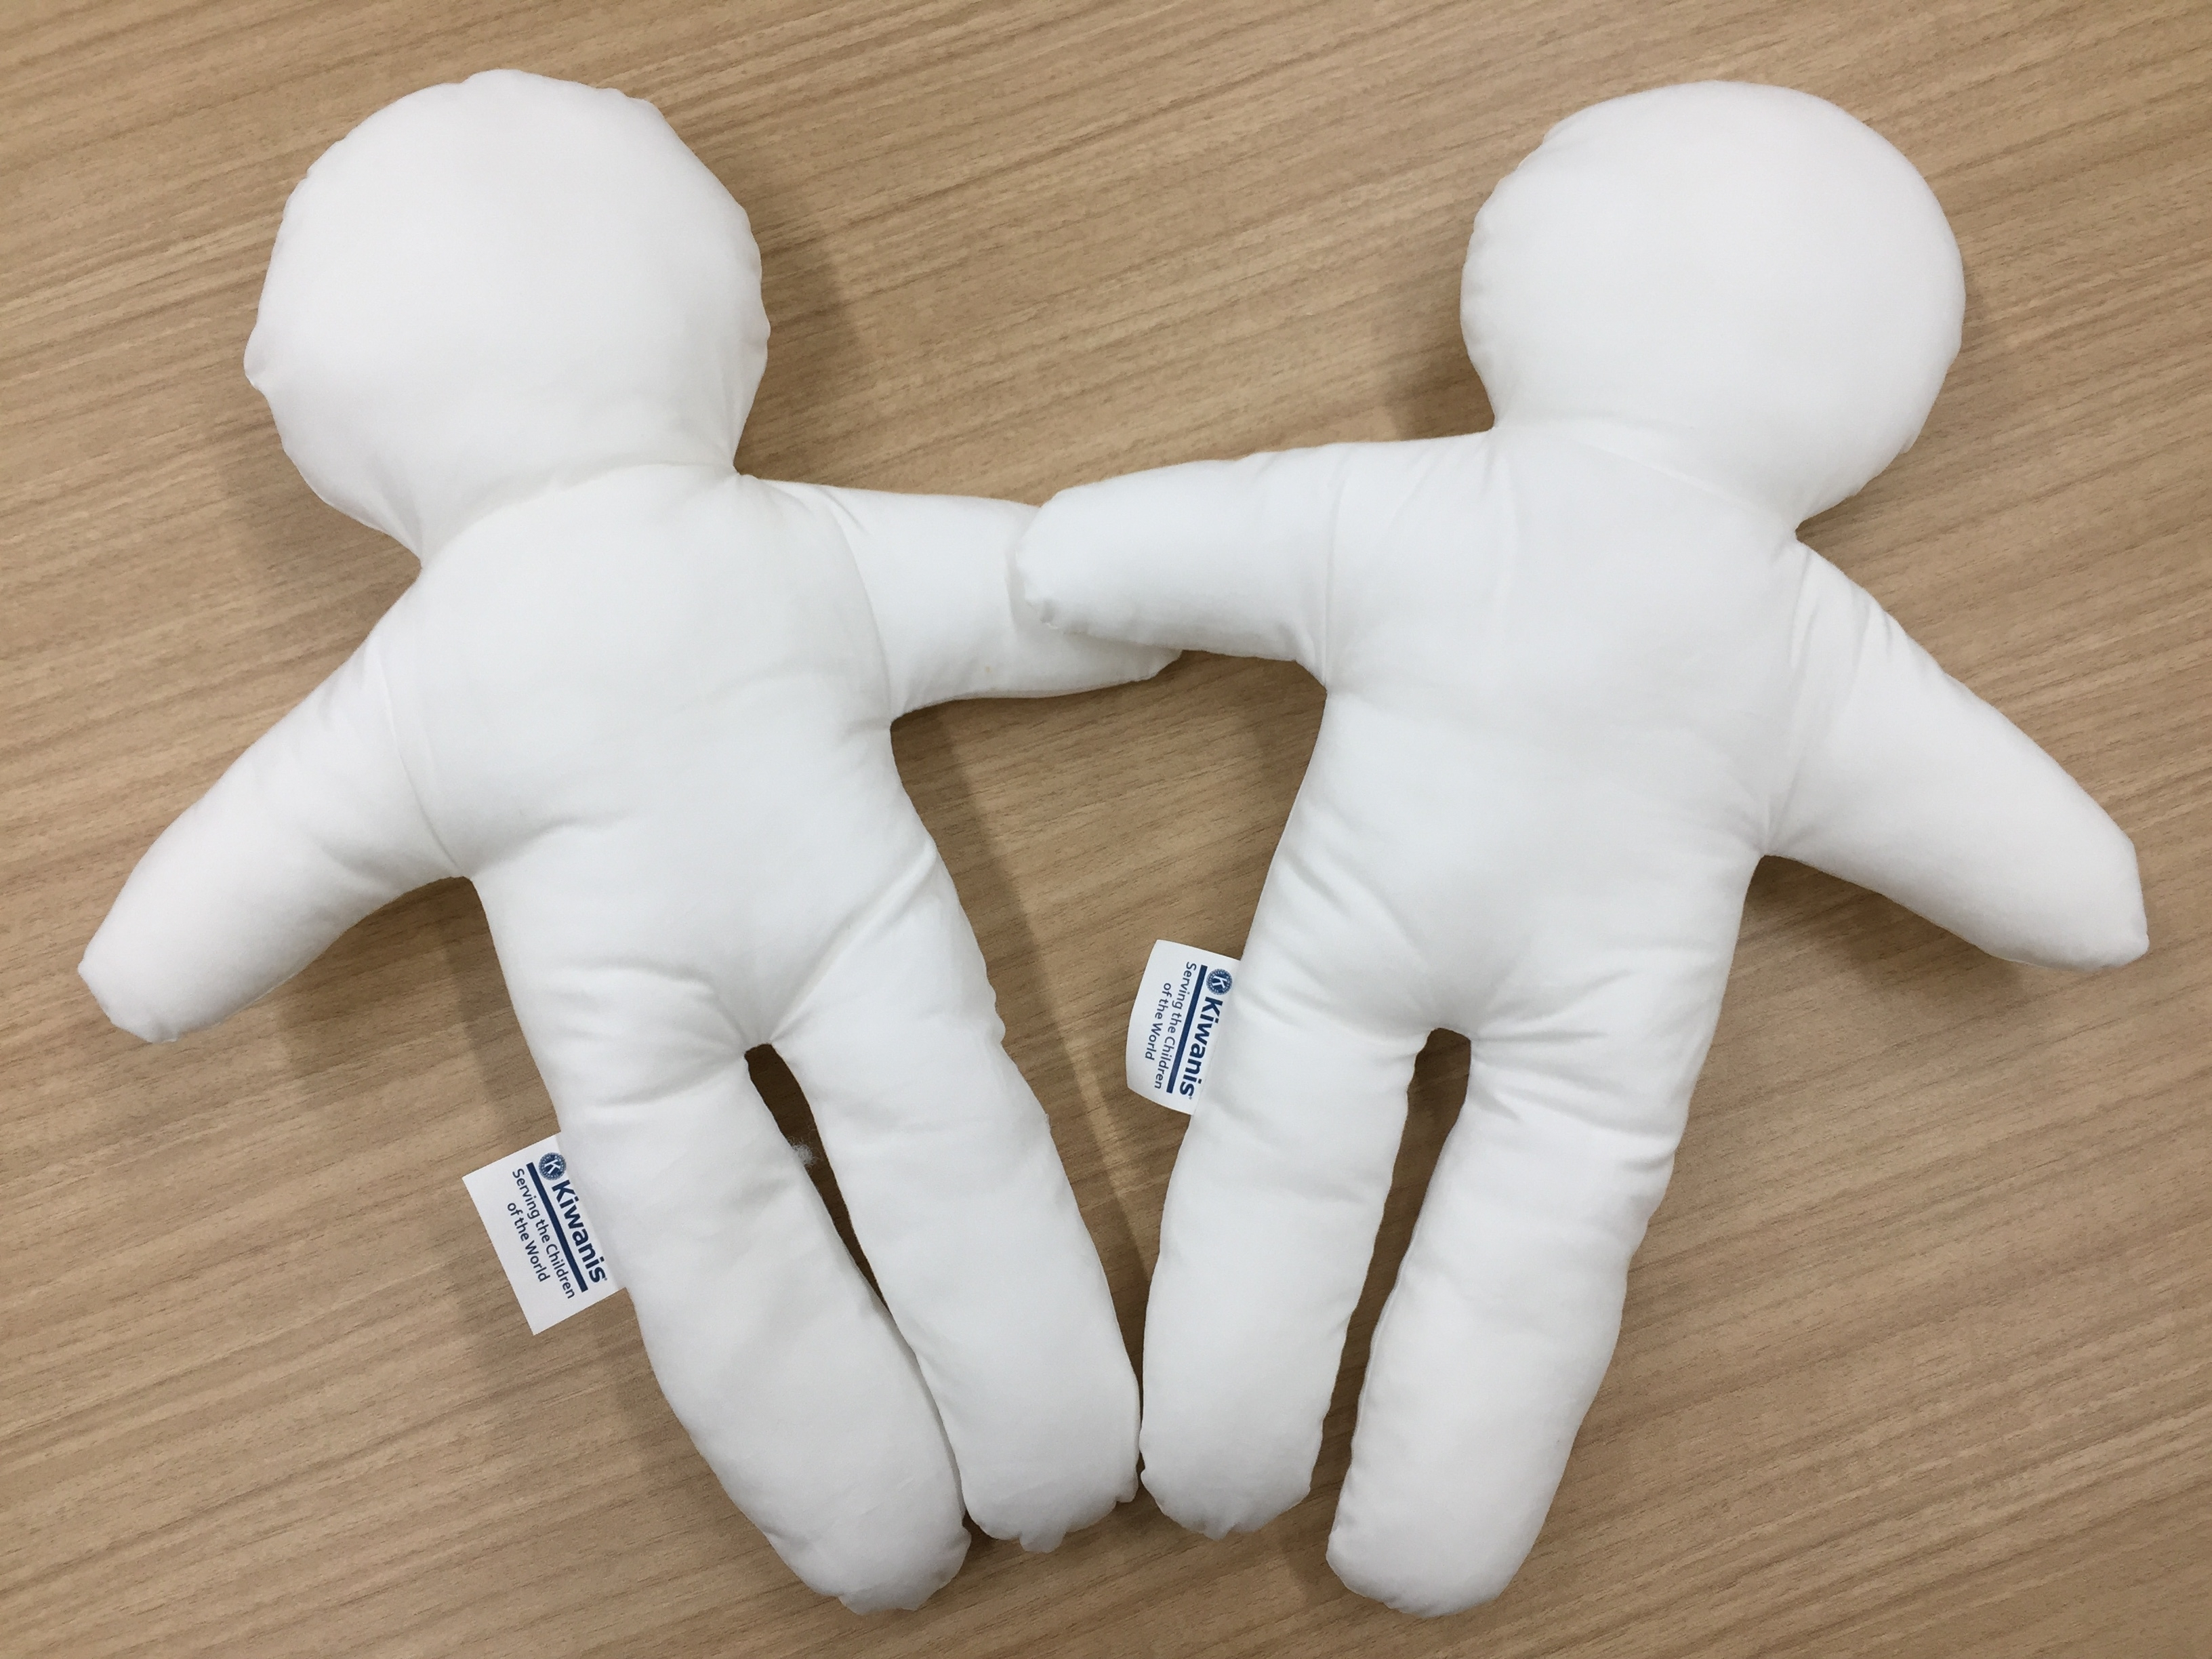 Trauma dolls created by our employees